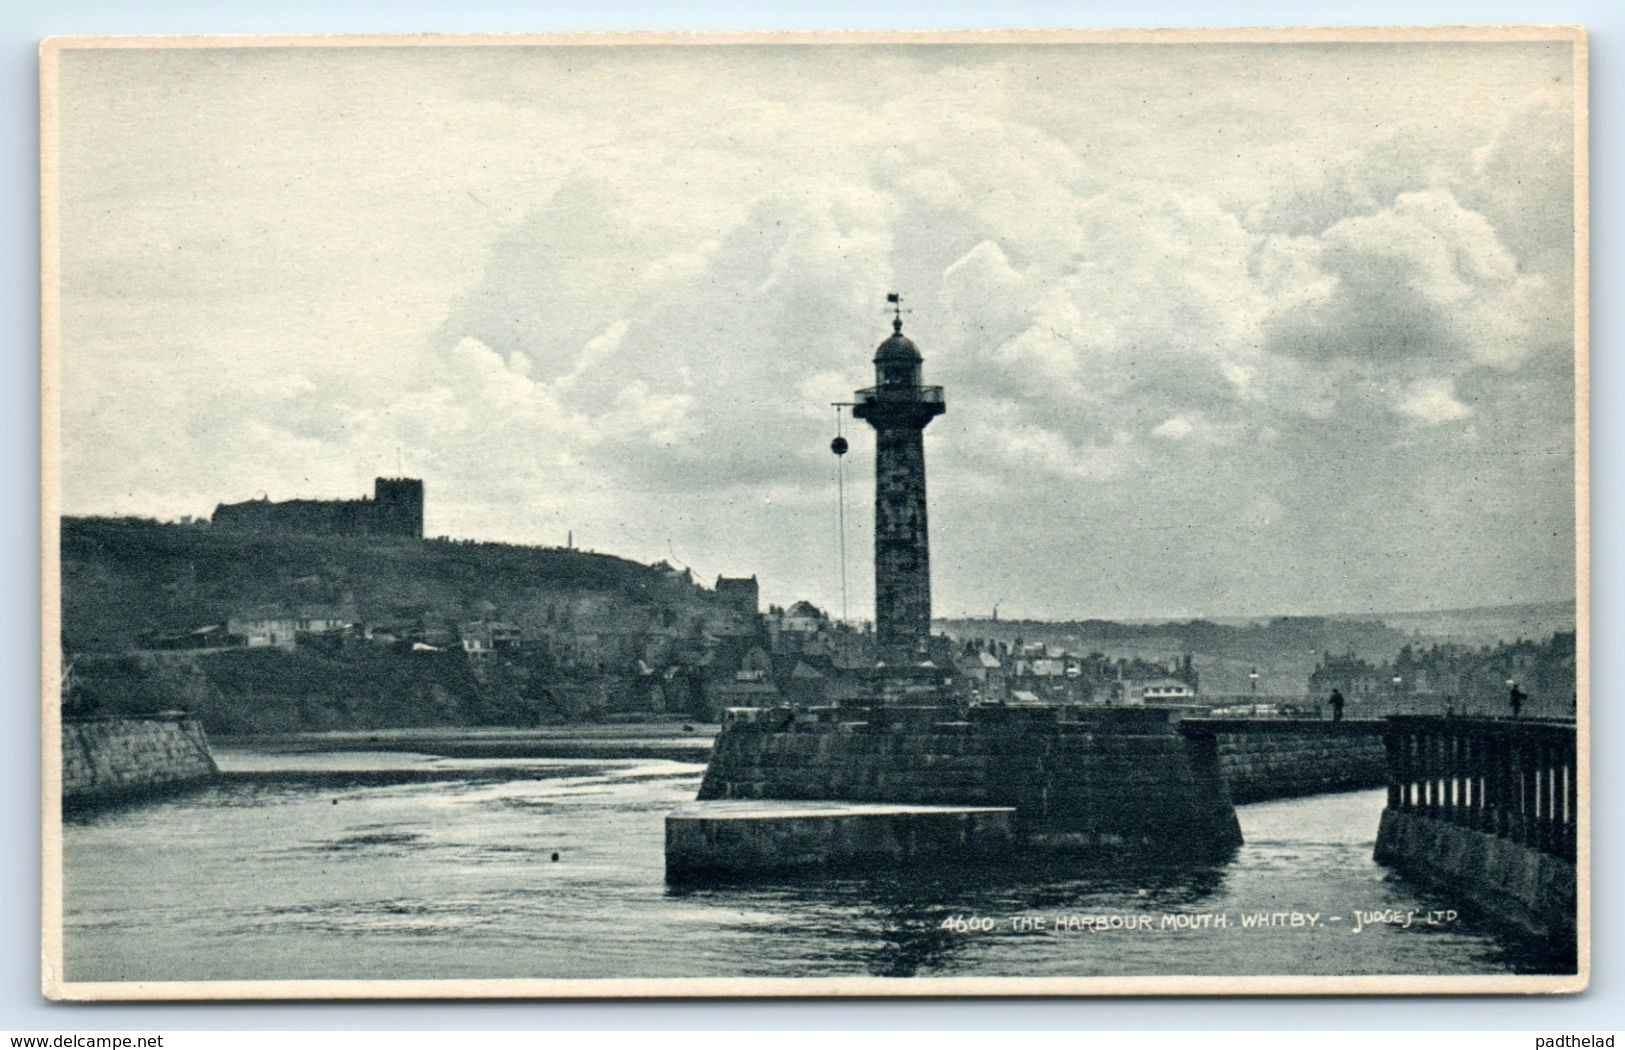 POSTCARD JUDGES 4600 THE HARBOUR MOUTH WHITBY BW UNPOSTED - Whitby